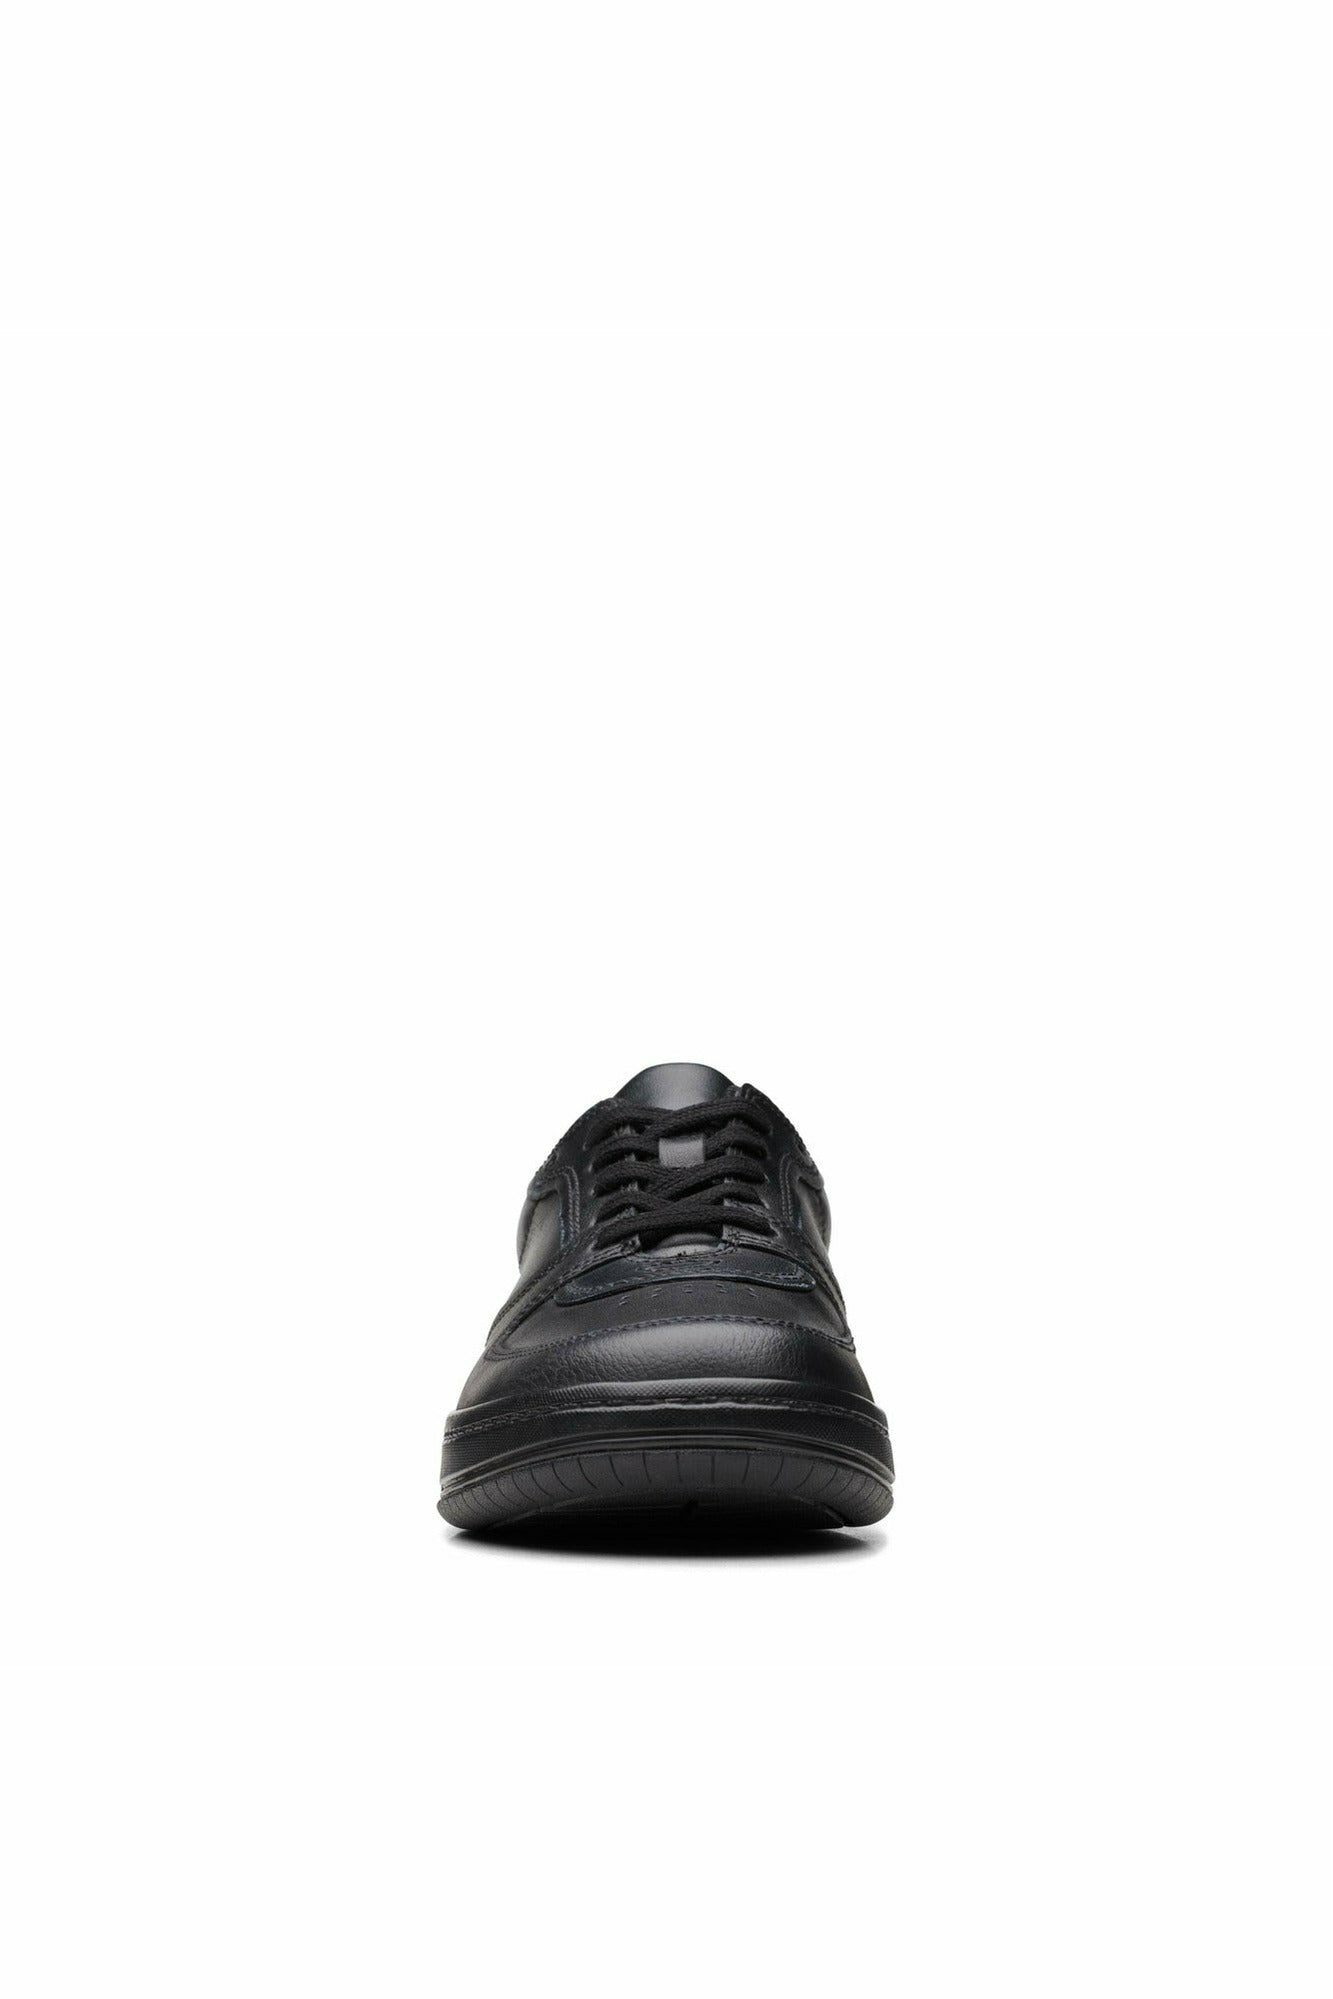 Clarks Fawn Lay Y in black leather